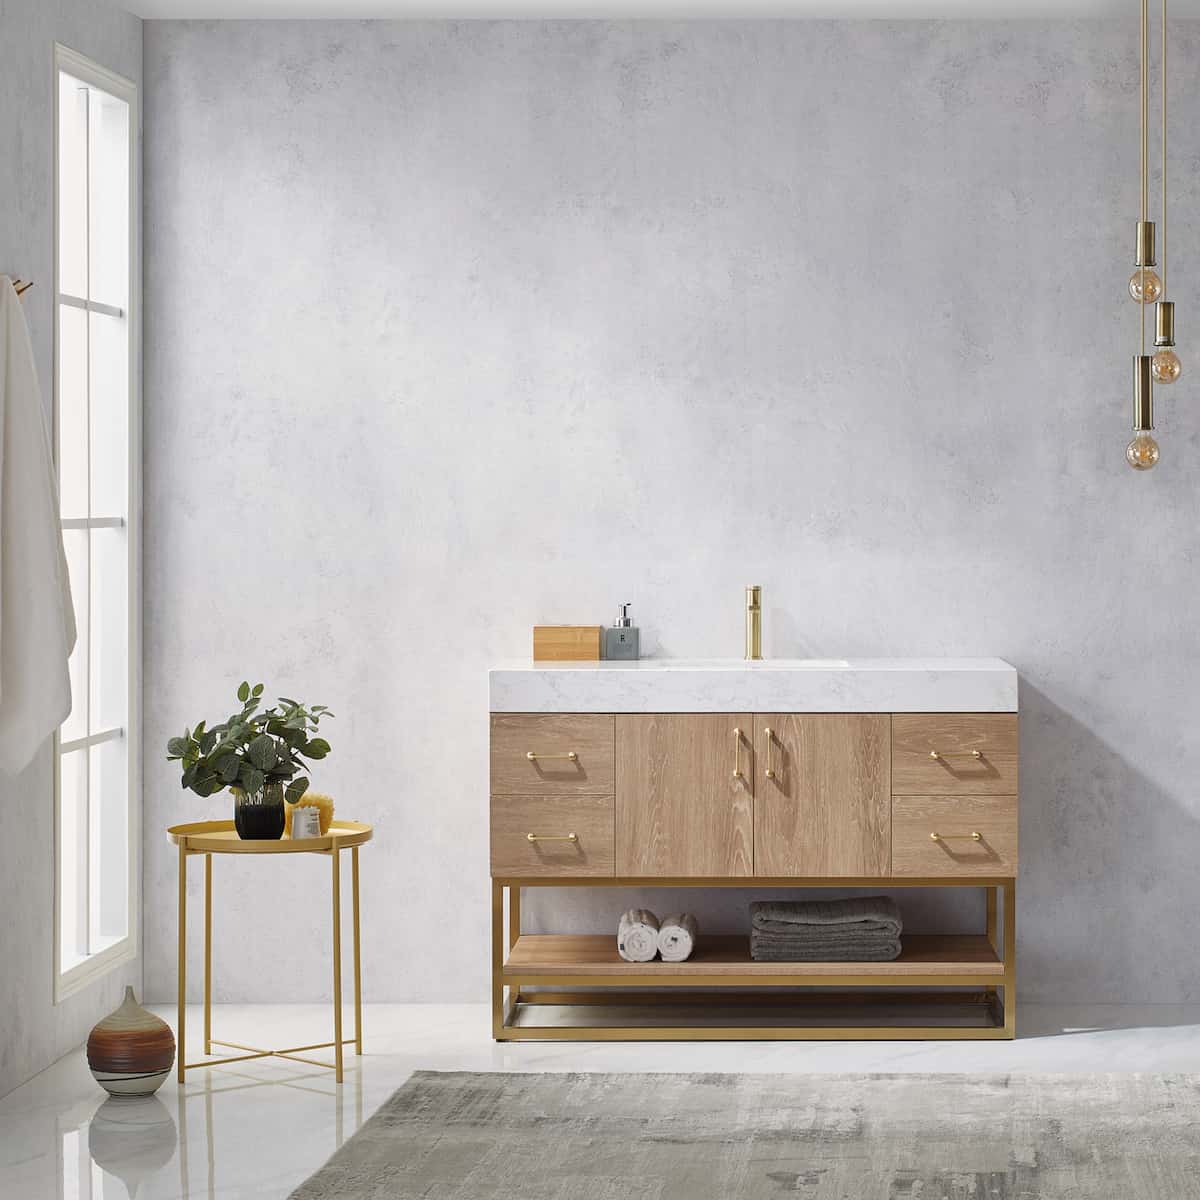 Vinnova Alistair 48 Inch Freestanding Single Vanity in North American Oak and Brushed Gold Frame with White Grain Stone Countertop Without Mirror in Bathroom 789048-NO-GW-NM